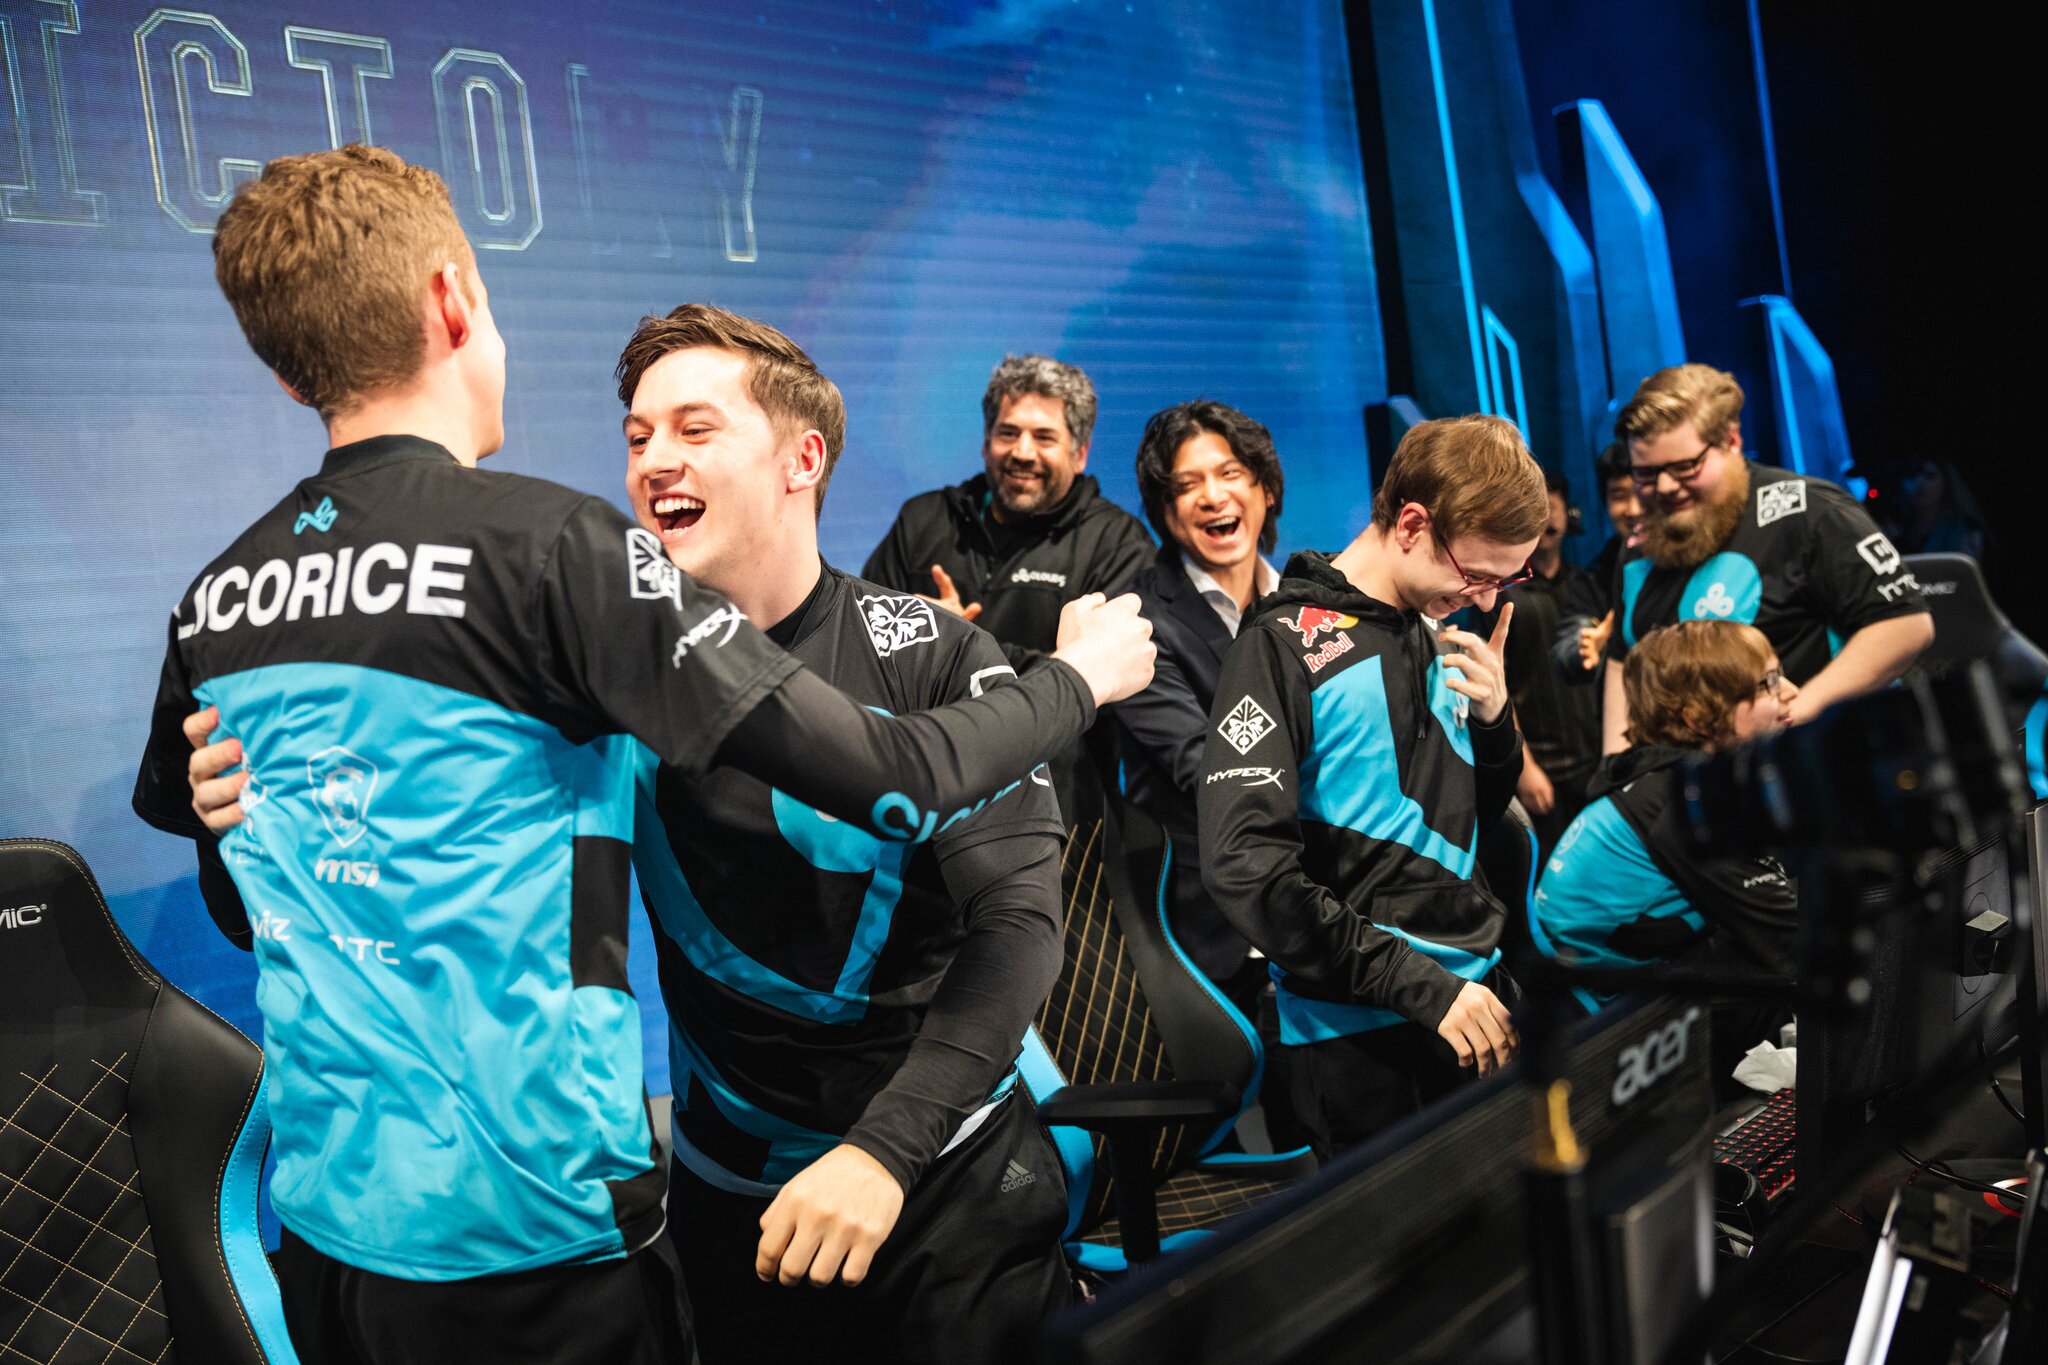 Cloud9 went on a miracle run to fight their way into the knockout stage.